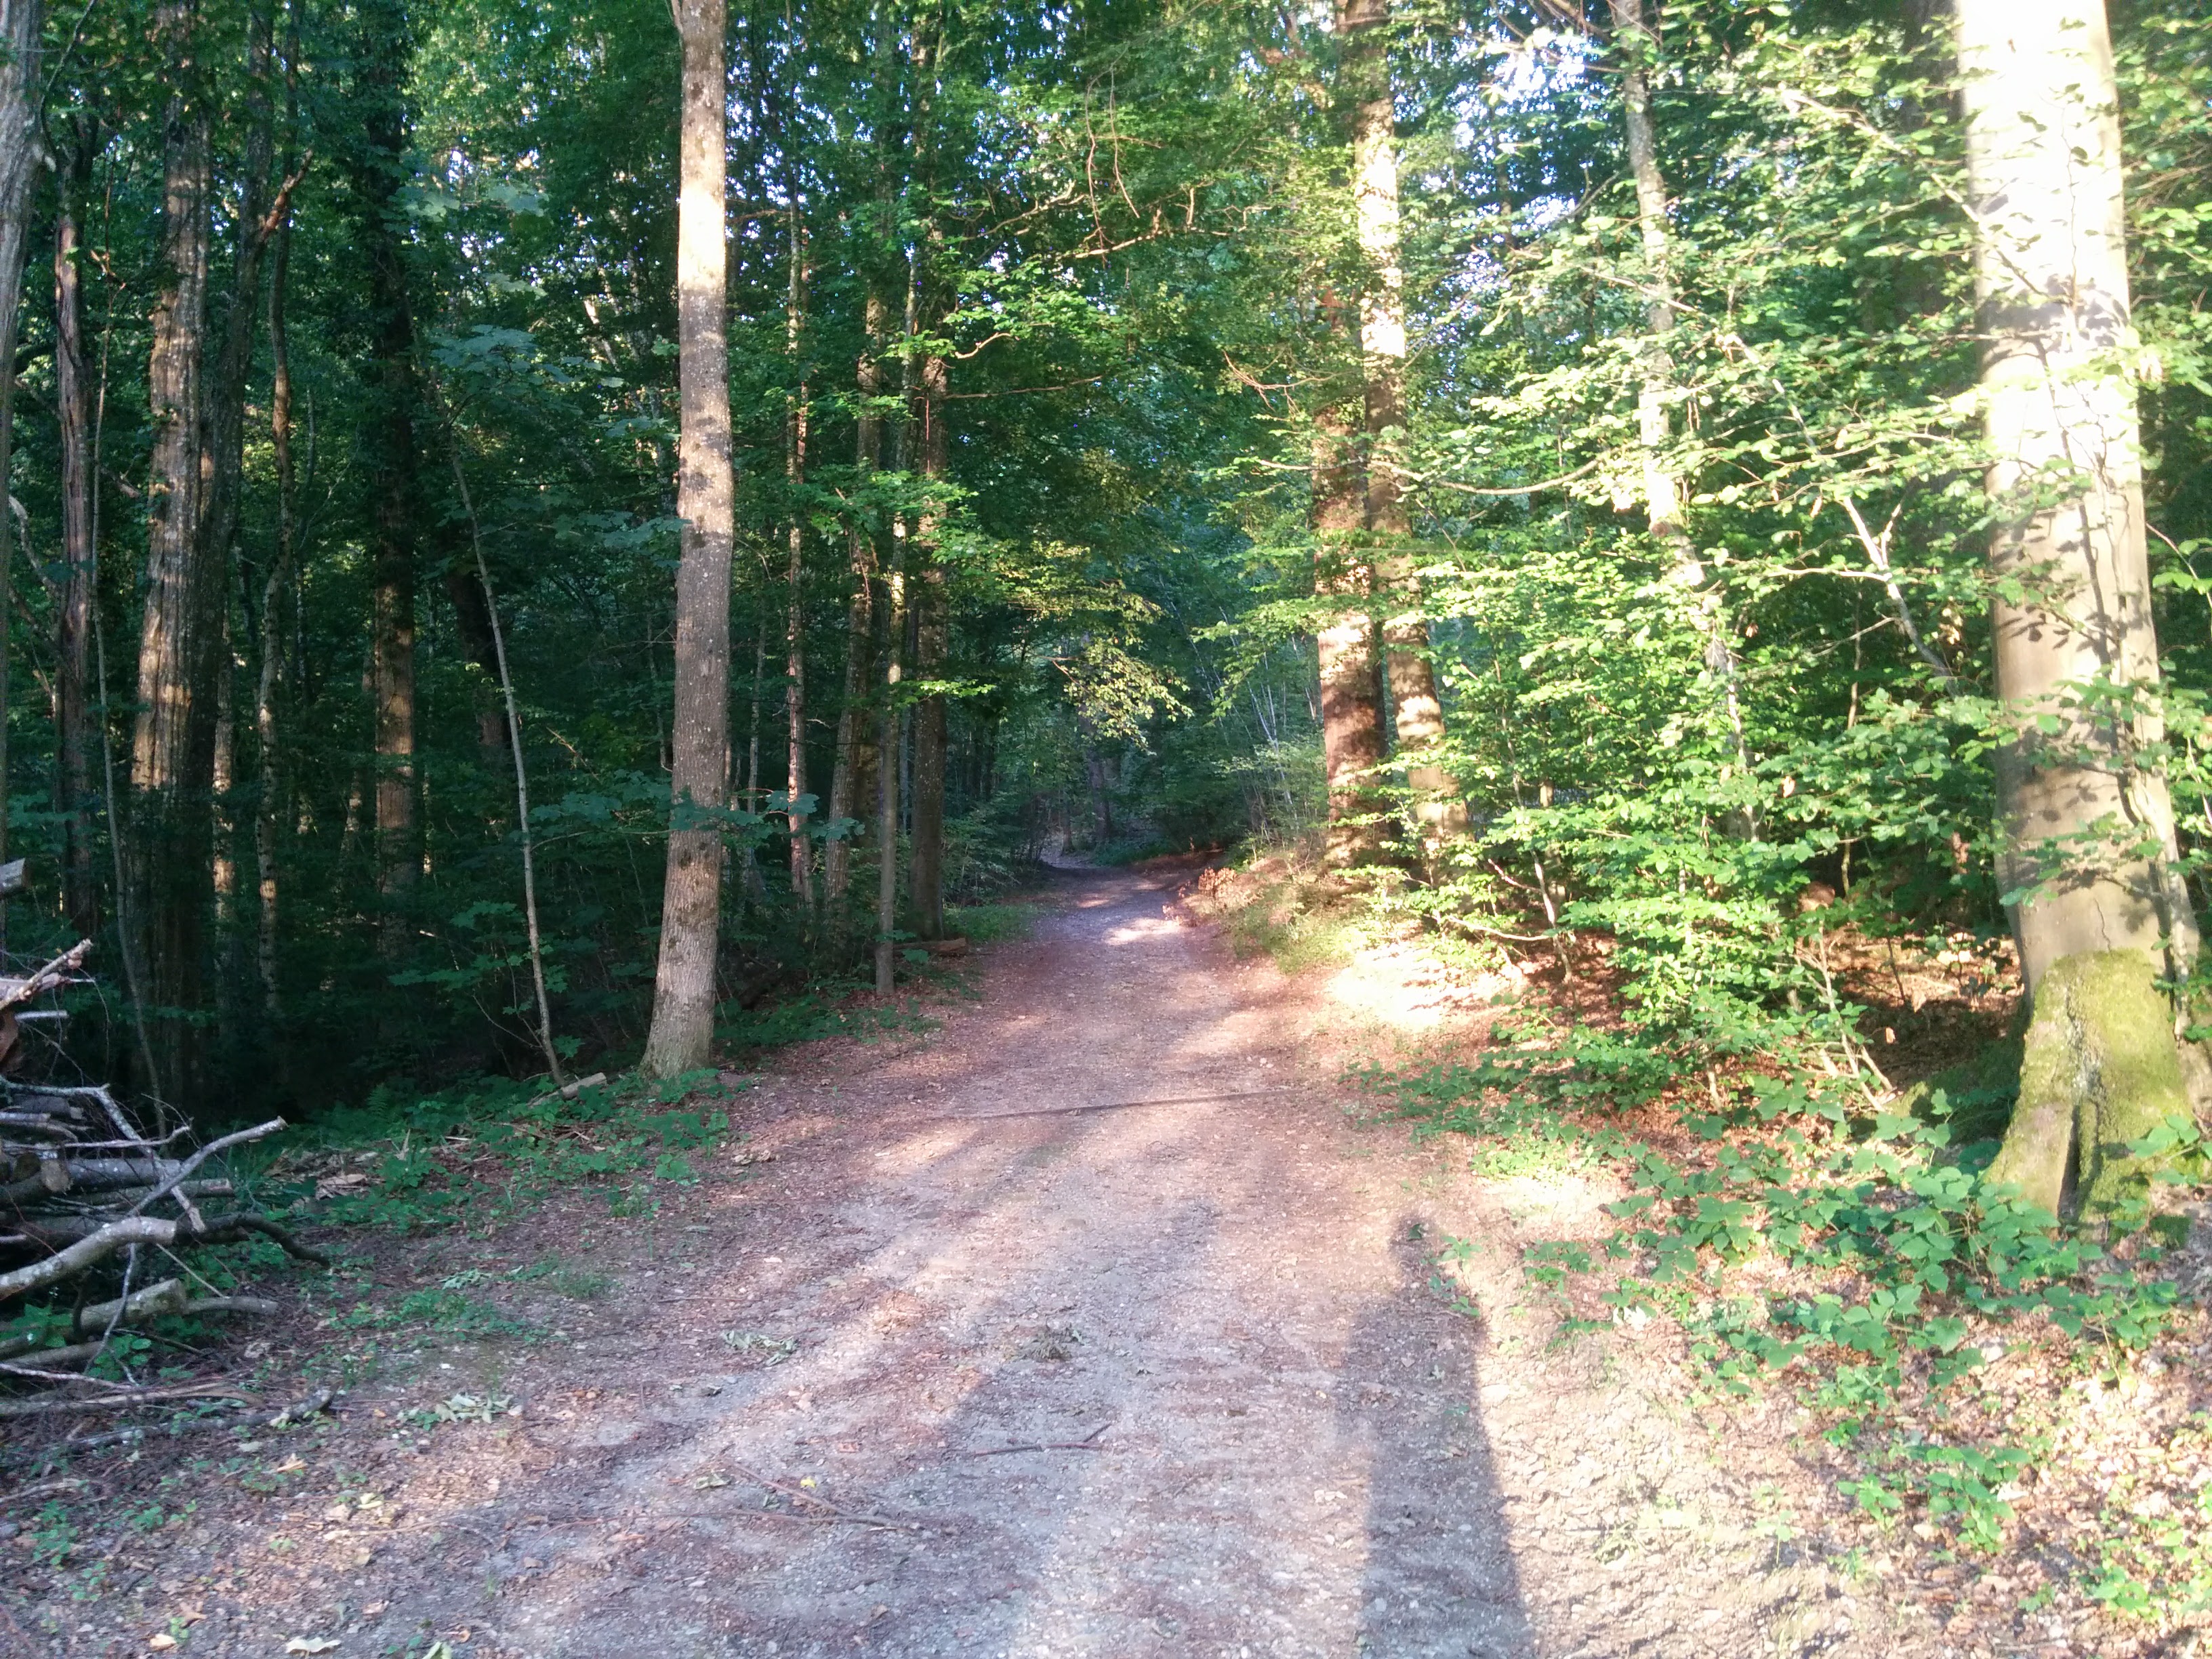 One of many forest trails